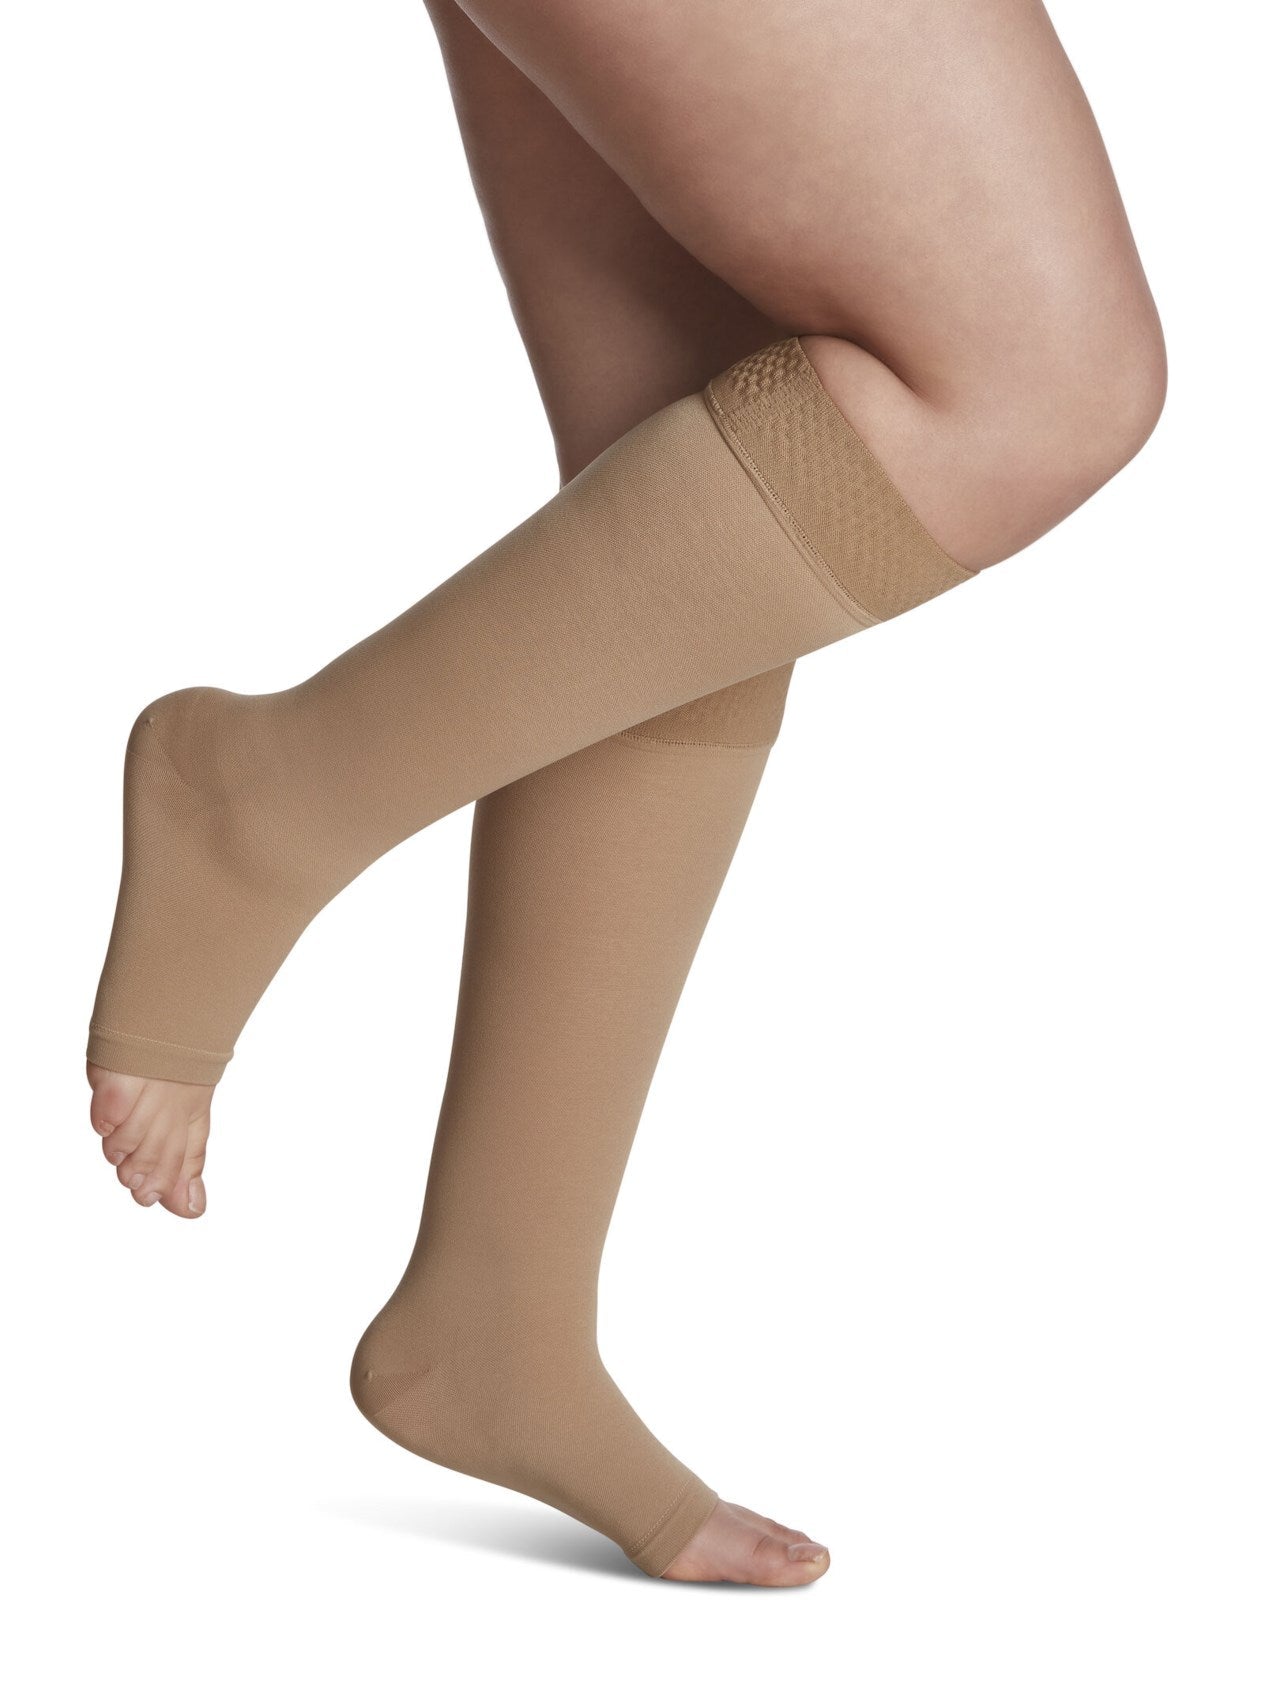 Sigvaris 860 Opaque Compression Socks 20-30 mmHg Calf High With Grip Top For Unisex Open Toe